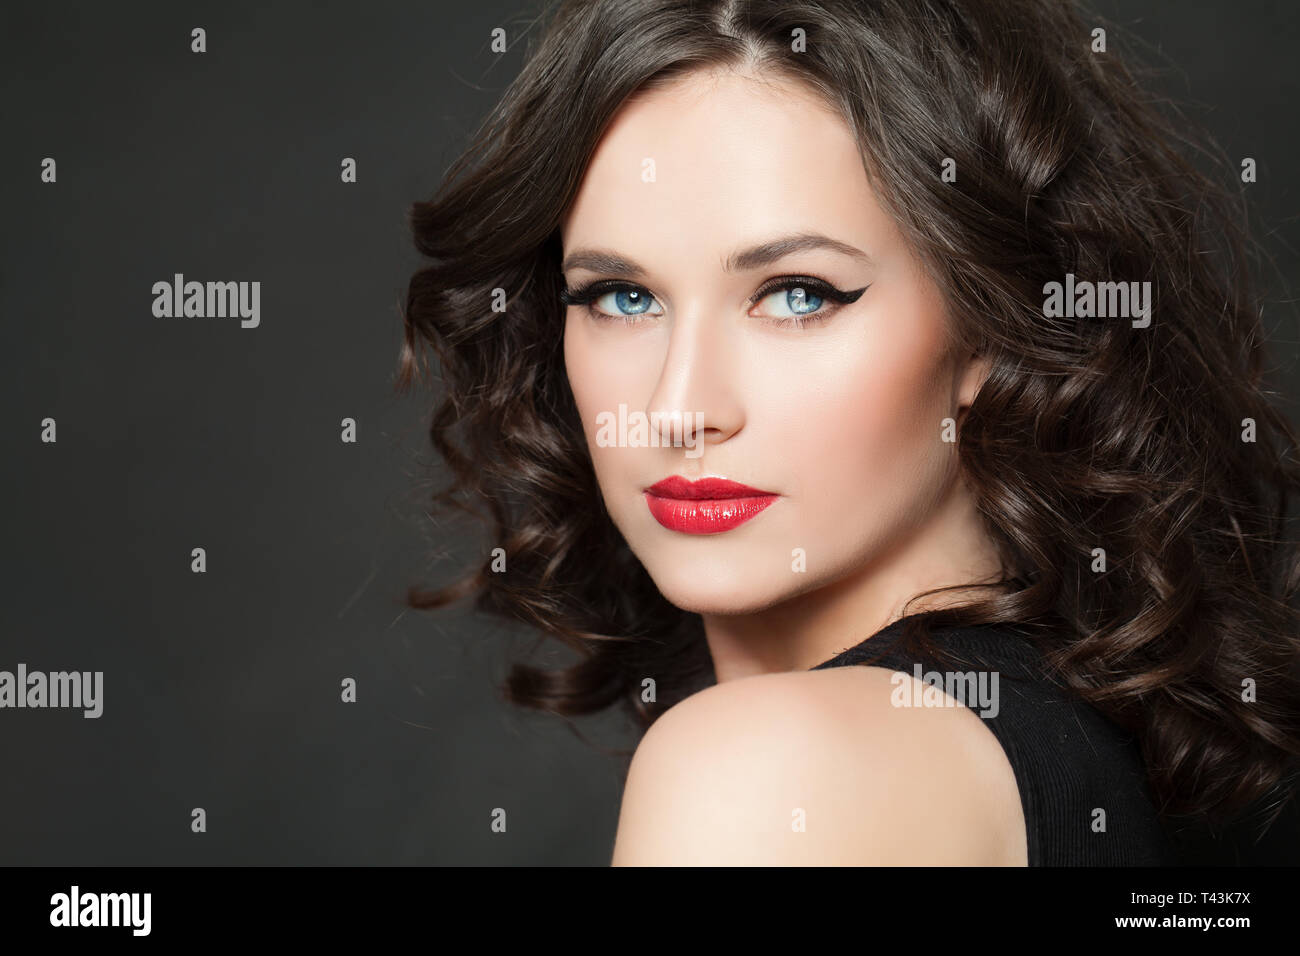 Beautiful woman with makeup and dark curly hair portrait Stock Photo